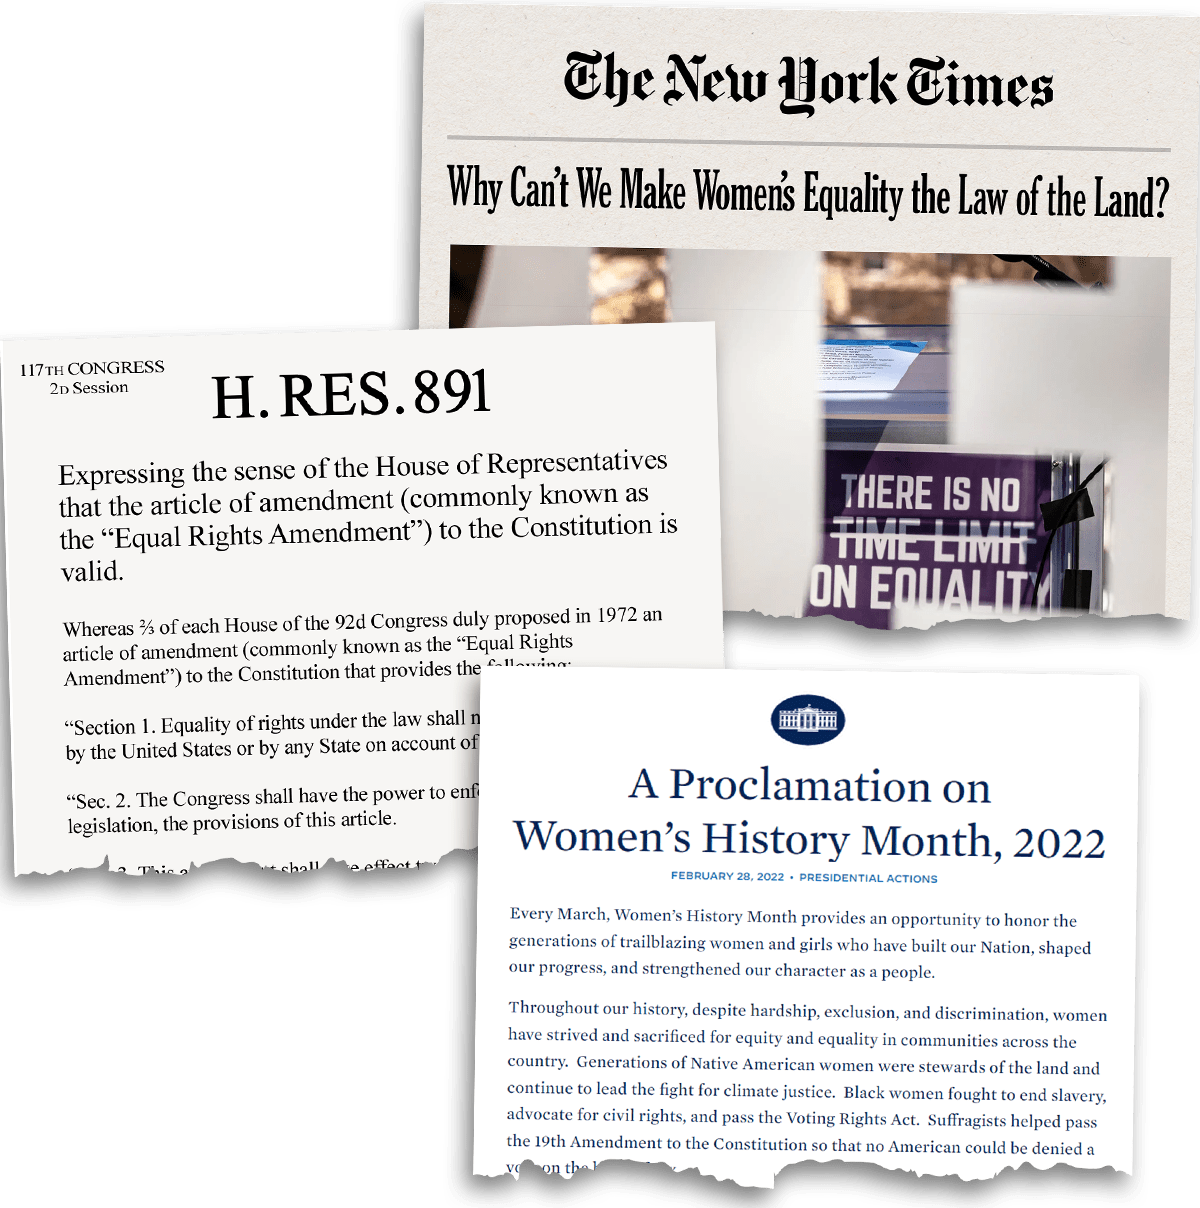 Image of 3 news clippings. The first is a New York Times article with the headline 'Why Can’t We Make Women’s Equality the Law of the Land?' The second is House Resolution 891 which says 'Expressing the sens of the House of Representatives that the article of amendment (commonly known as the Equal Rights Amendment) to the Constitution is valid' The third is a Presidential Proclomation on Women's History Month, 2022